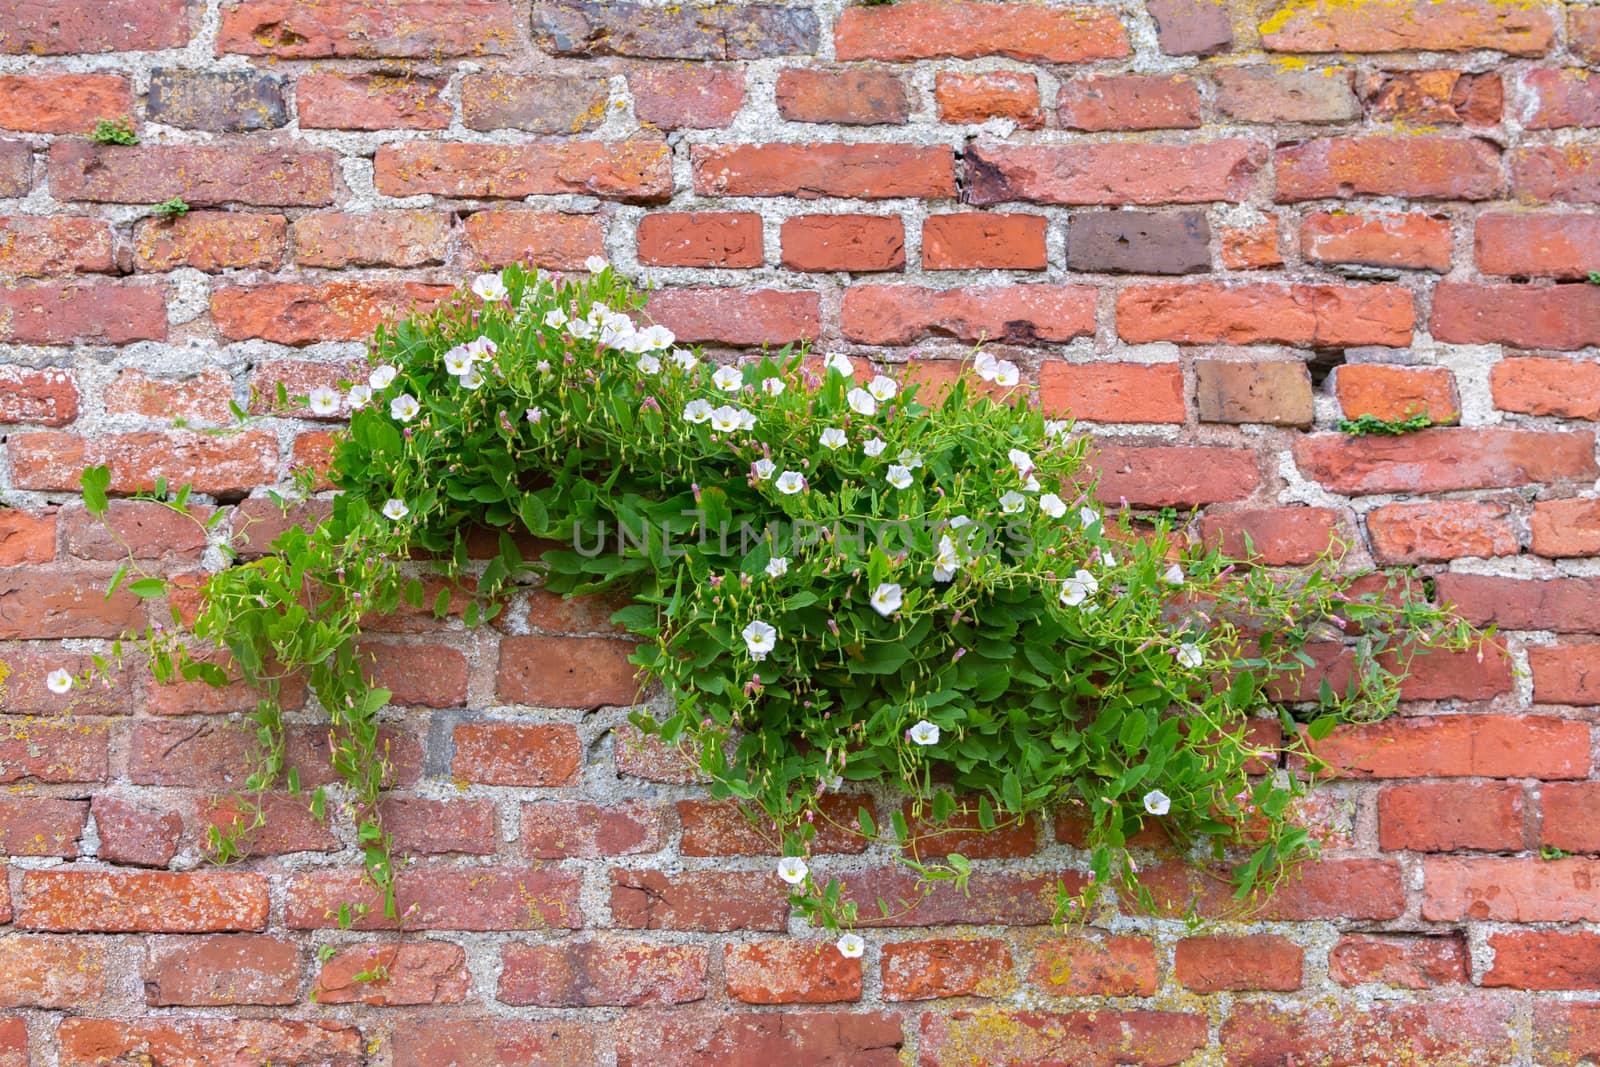 Scrub lone bindweed growing on a red brick wall. Bindweed trembling in the wind against a background of a brick wall.